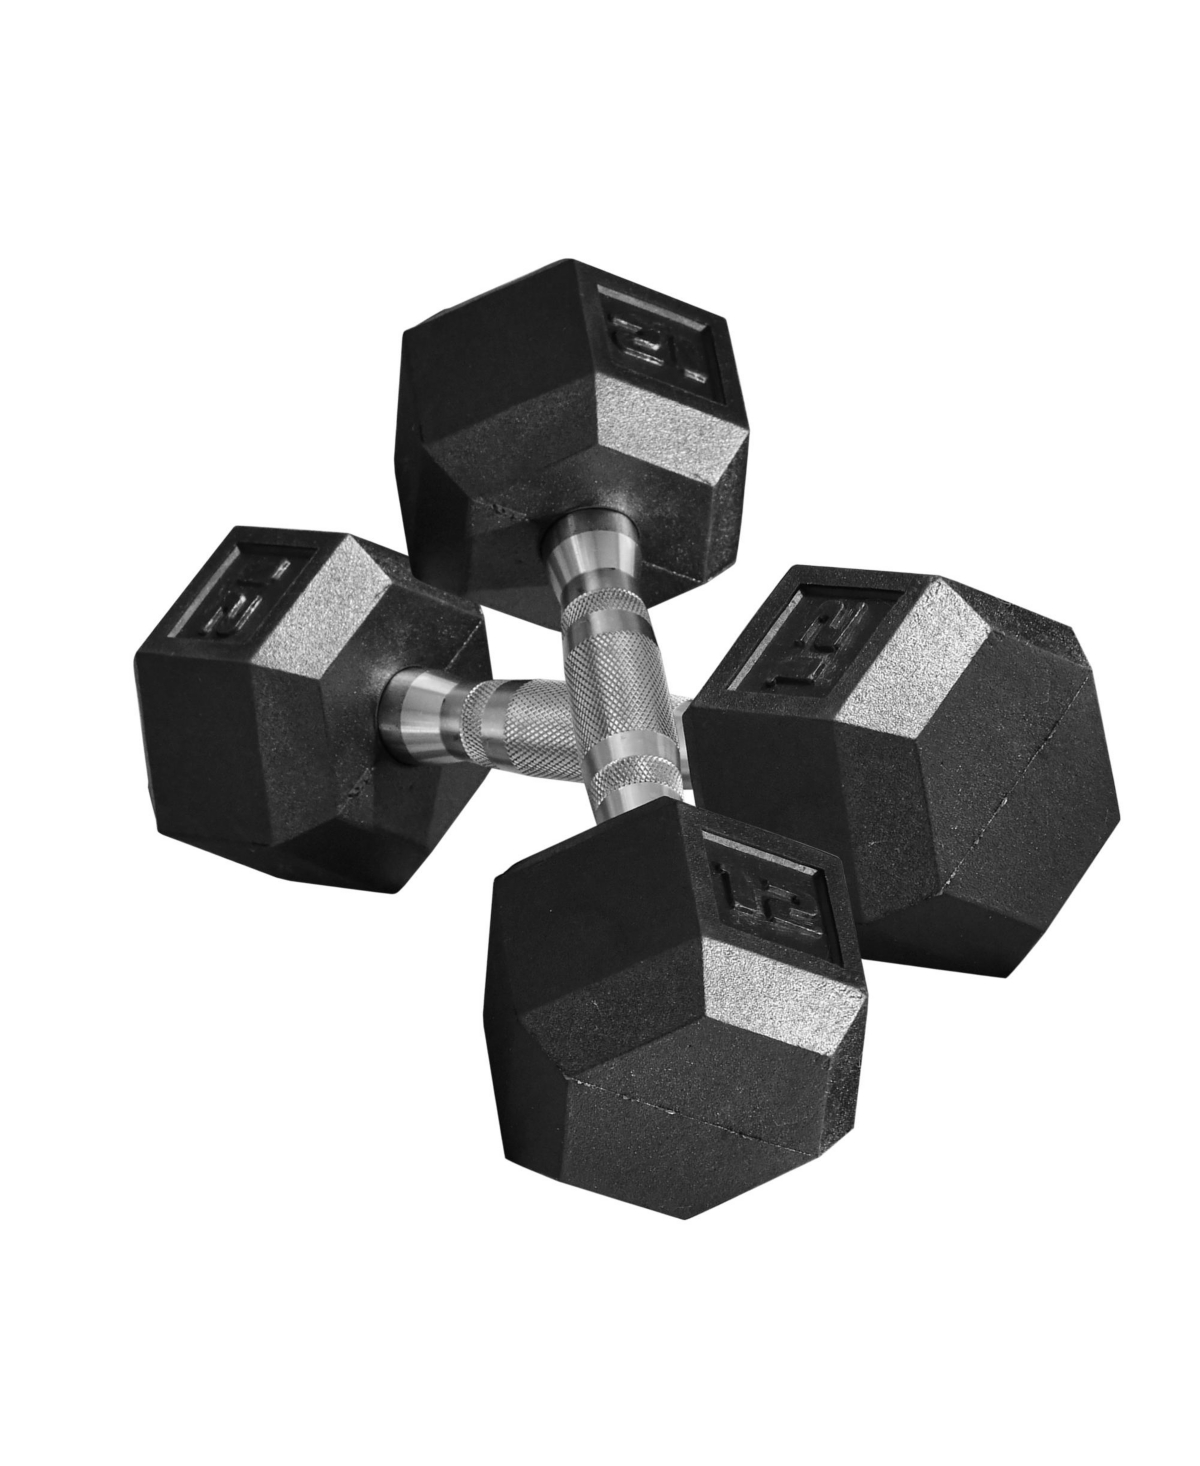 Hex Dumbbells Set, Rubber Hand Weights with Non-Slip Handles, Anti-roll, for Women or Men Home Gym Workout, 2 x 12lbs - Black